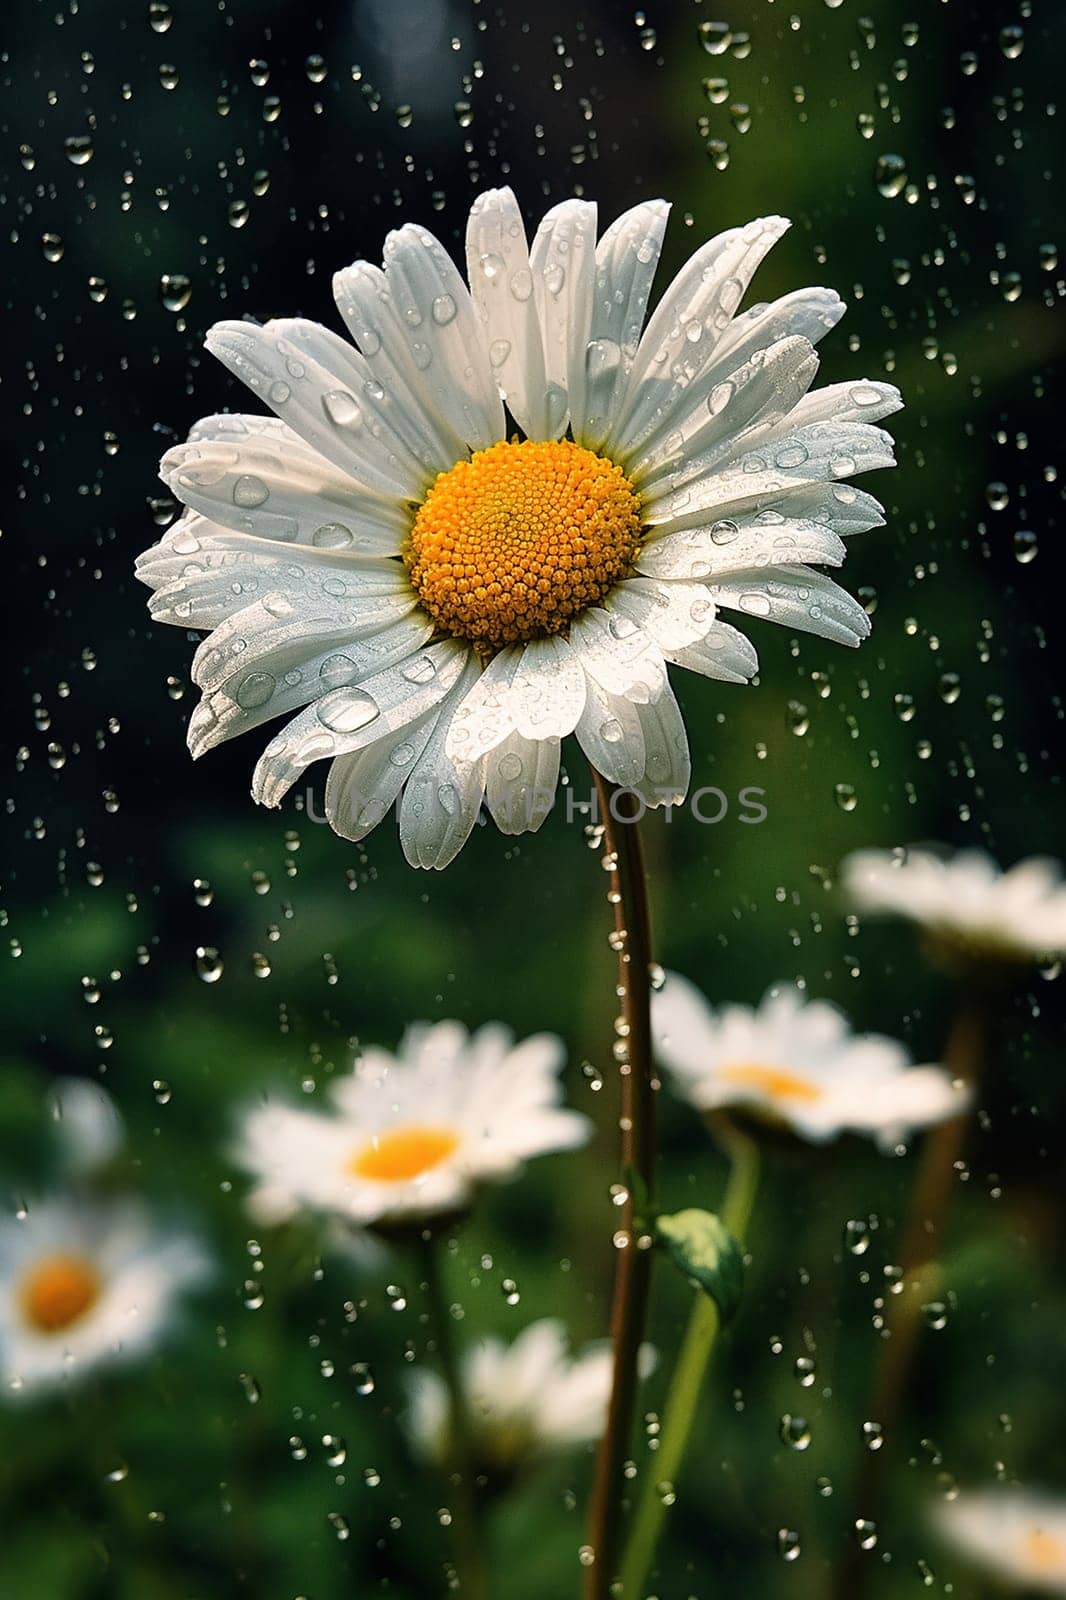 A daisy with water droplets against a blurred background.